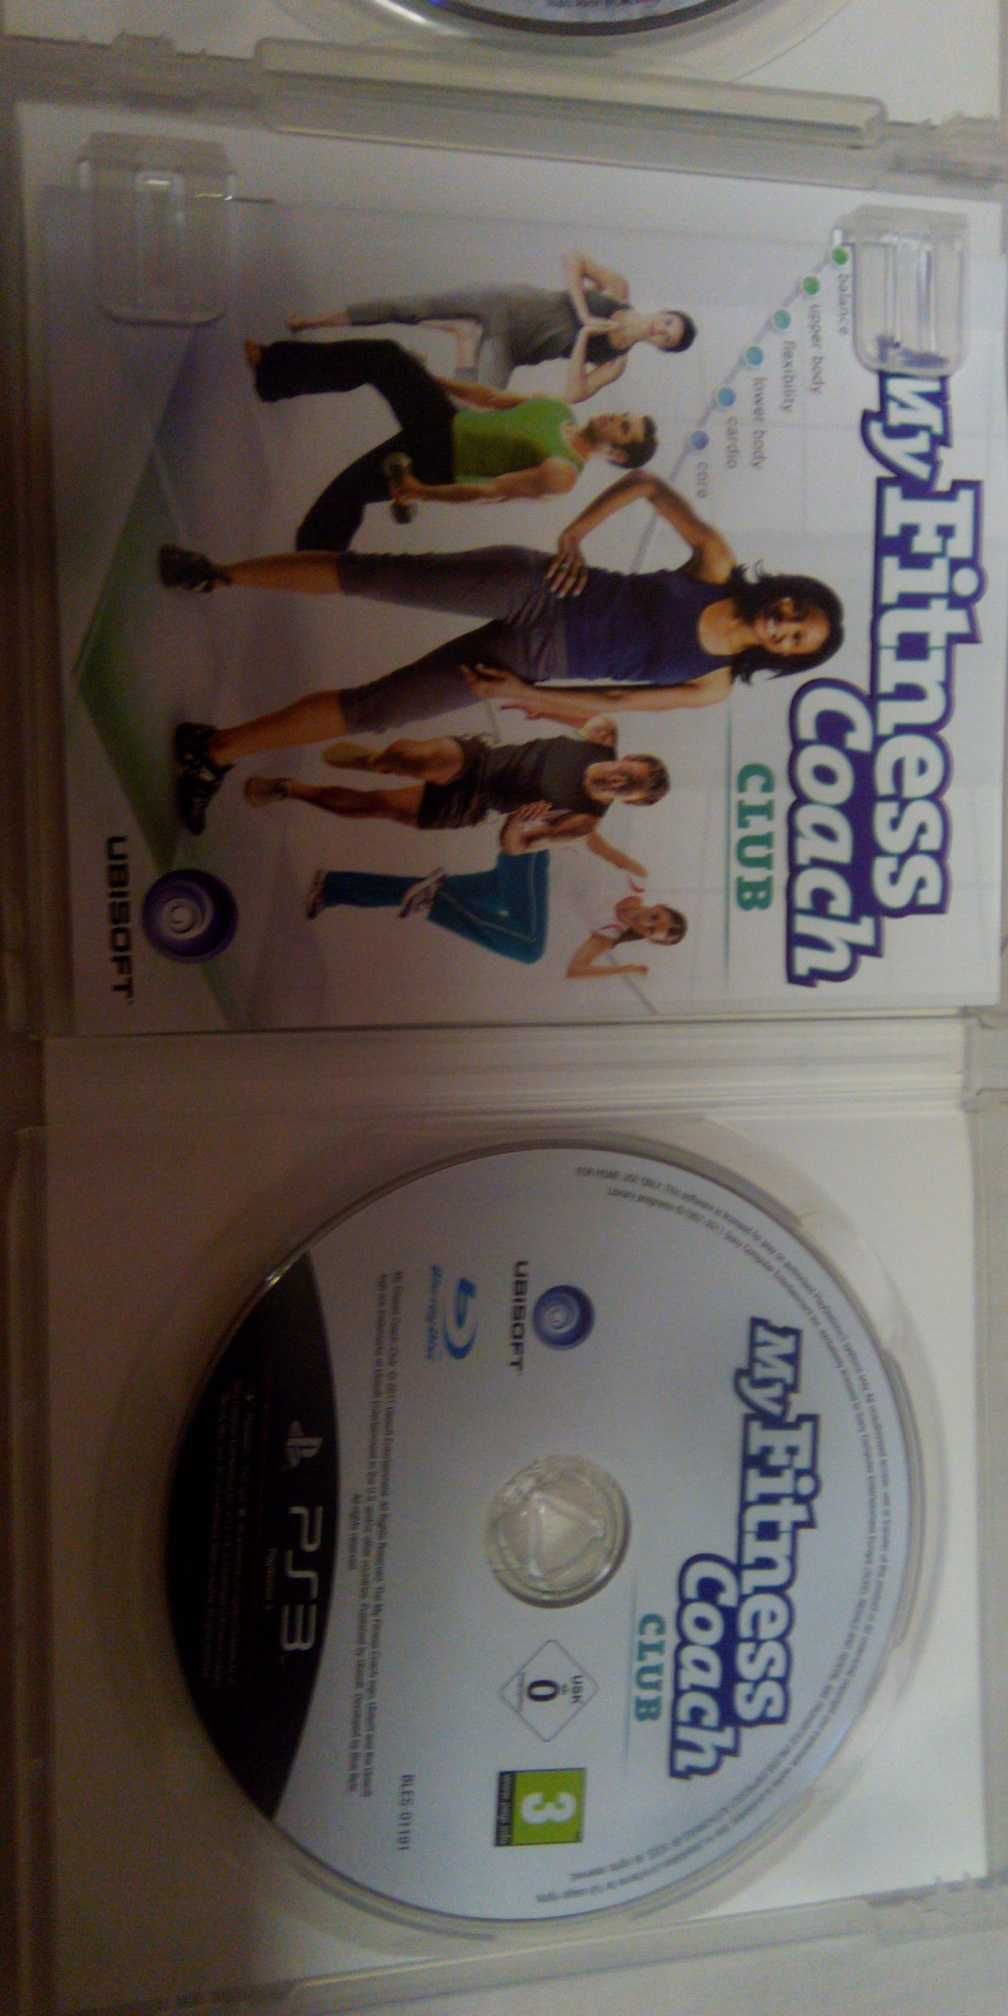 My Fitness Coach Club PS3 + FIFA 12 PS3 komplet 2 gry PS3